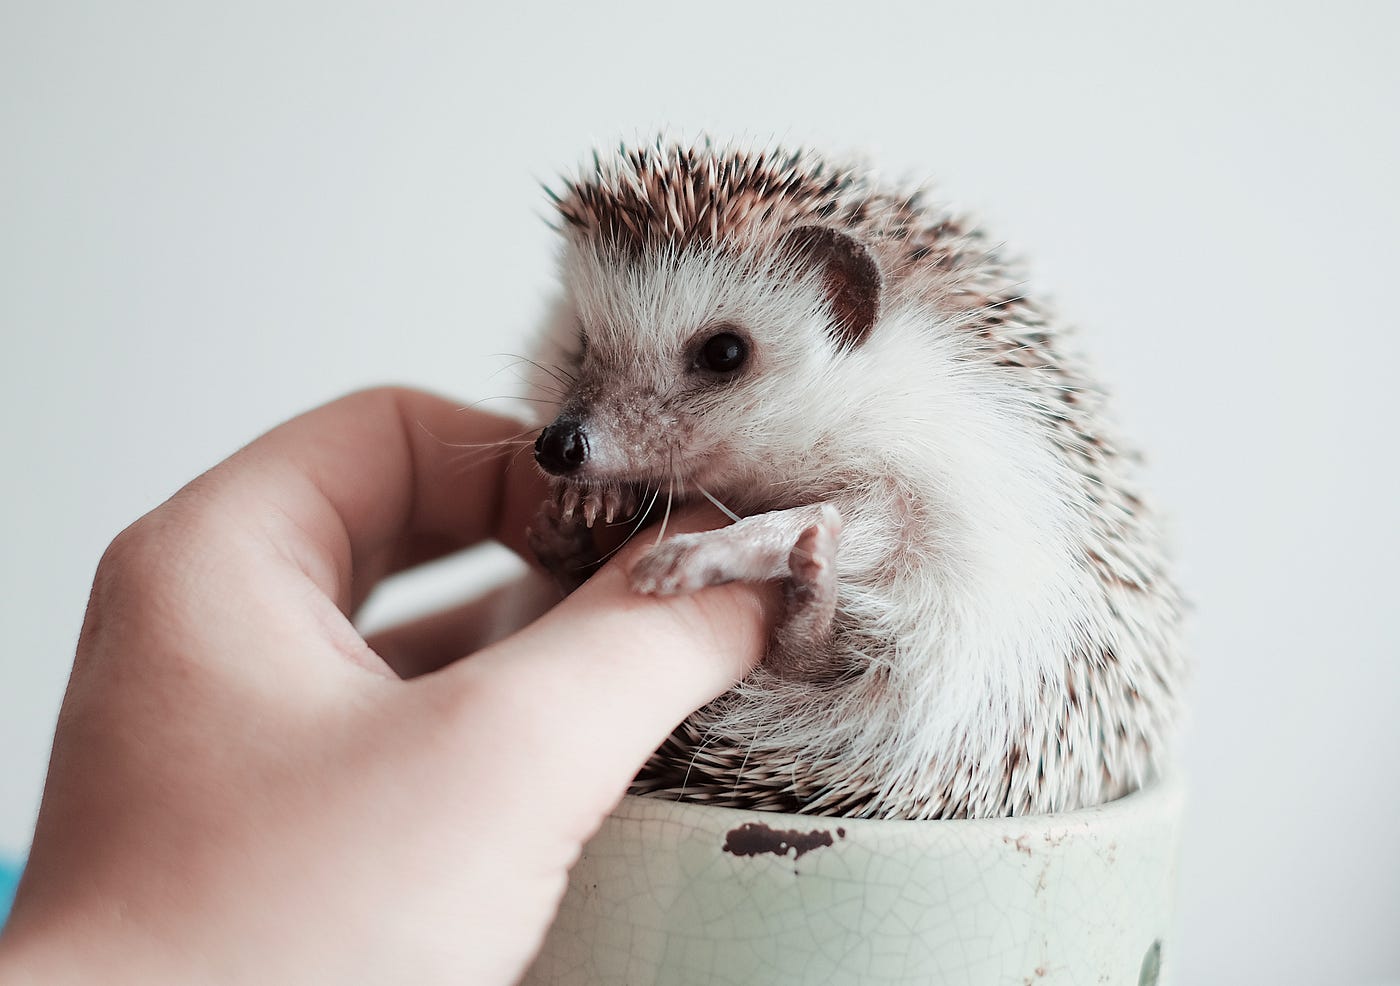 Cute hedgehog sitting inside a teacup as a hand is rubbing its belly.